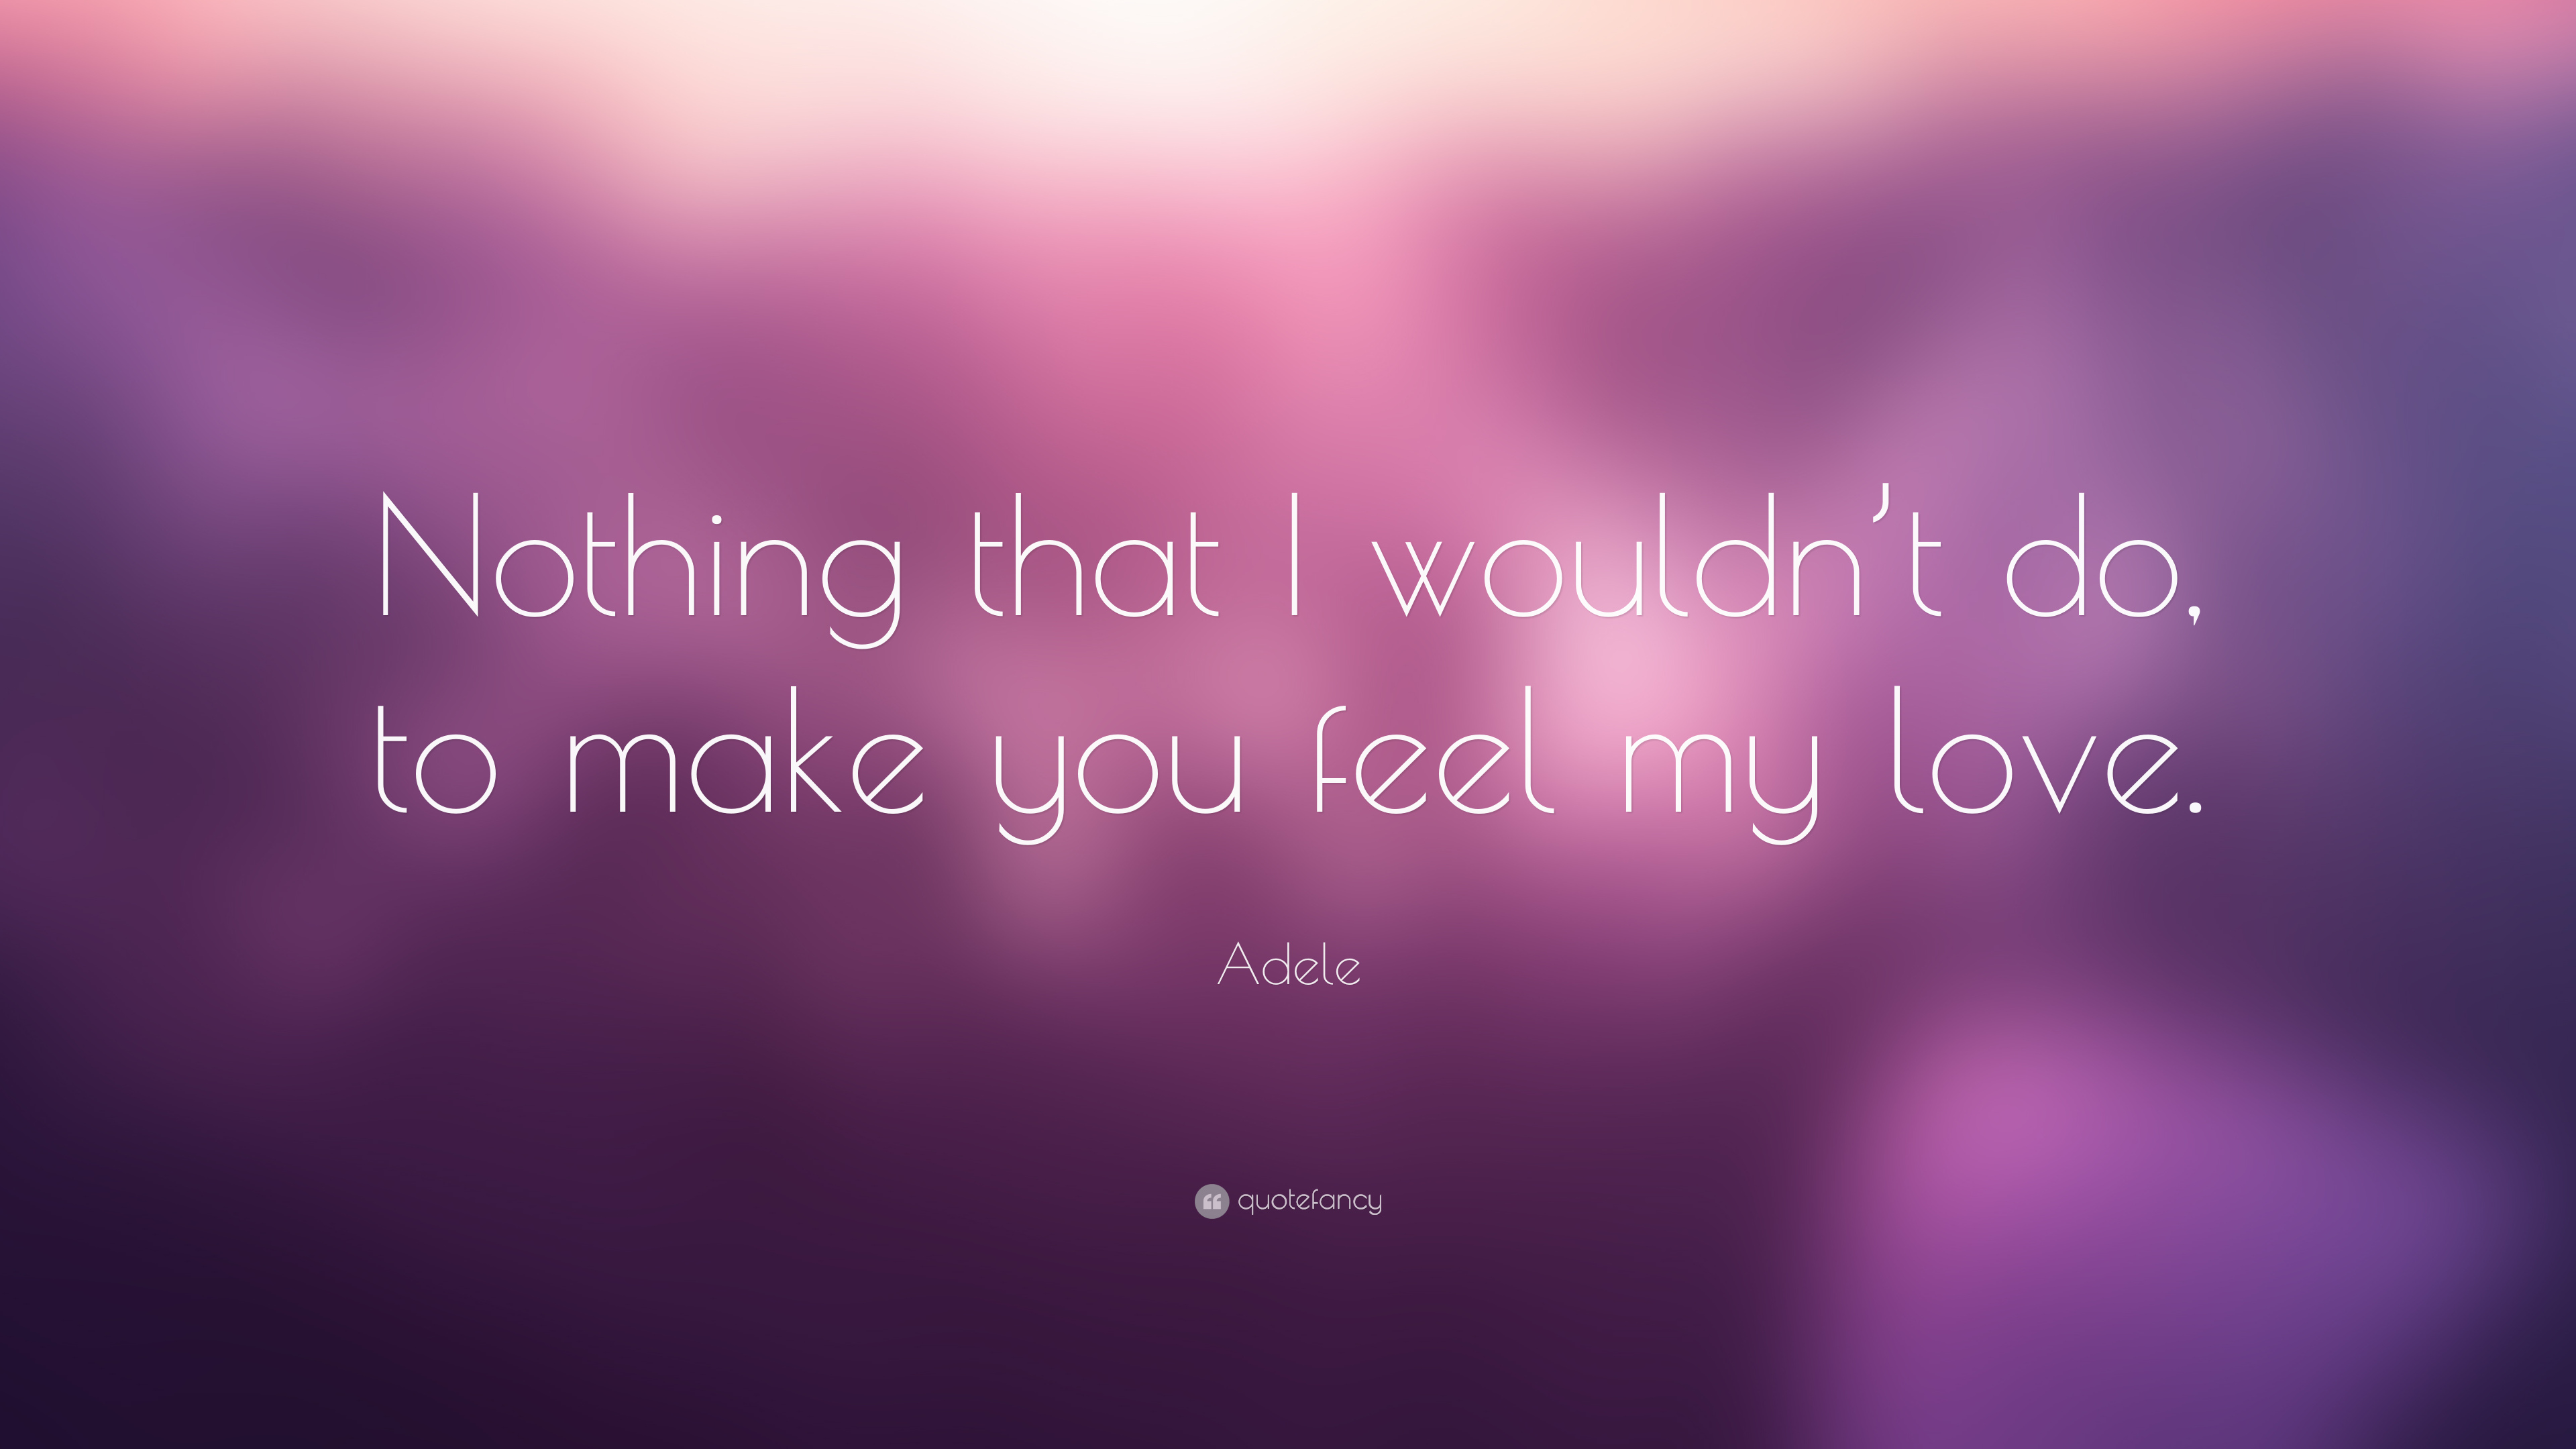 7 Adele Quotes About Love